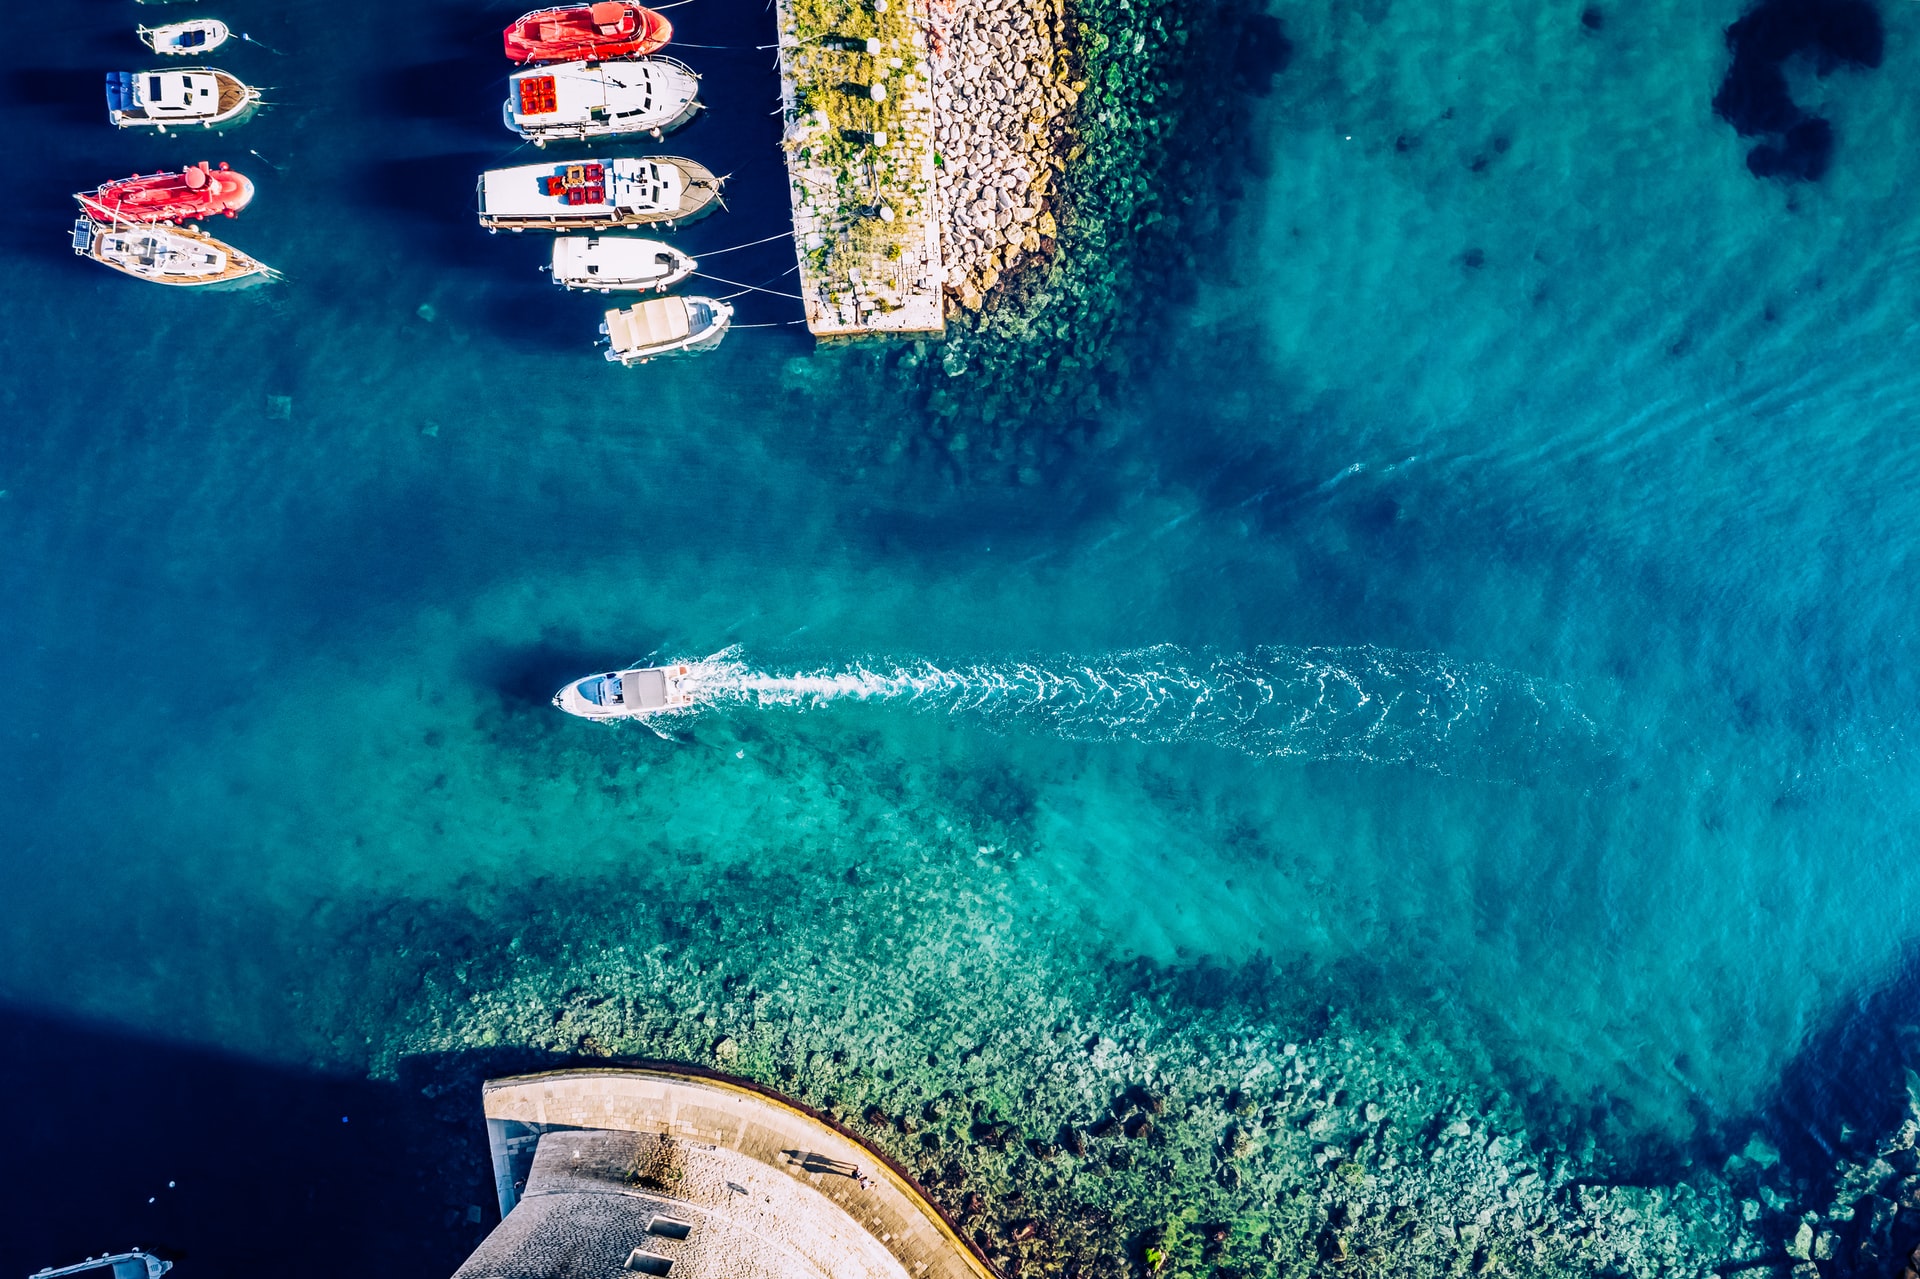 <p>One of the most beautiful cities in the world that is worth seeing from an incredible kayak tour. The itinerary will take you to the fortress of the city and Lokrum island offering you some spectacular views from the sea that you will remember forever.</p> <p>Image: Unsplash - Lucian Petronel Potlog</p>